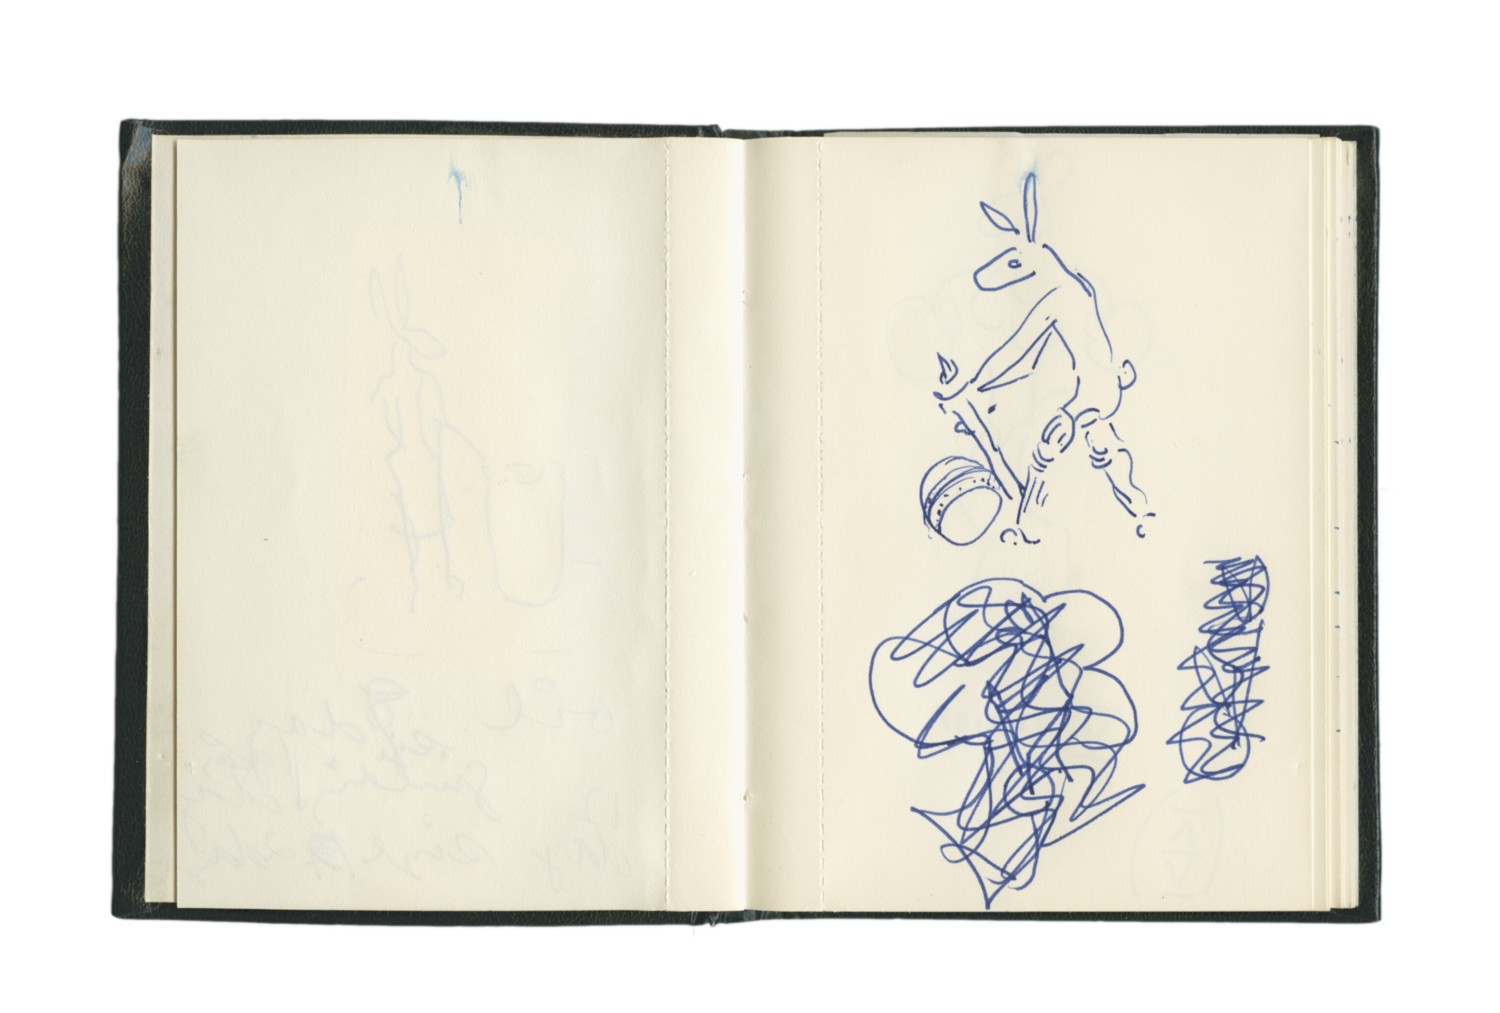 Sketch and notebook (August – September 1981)